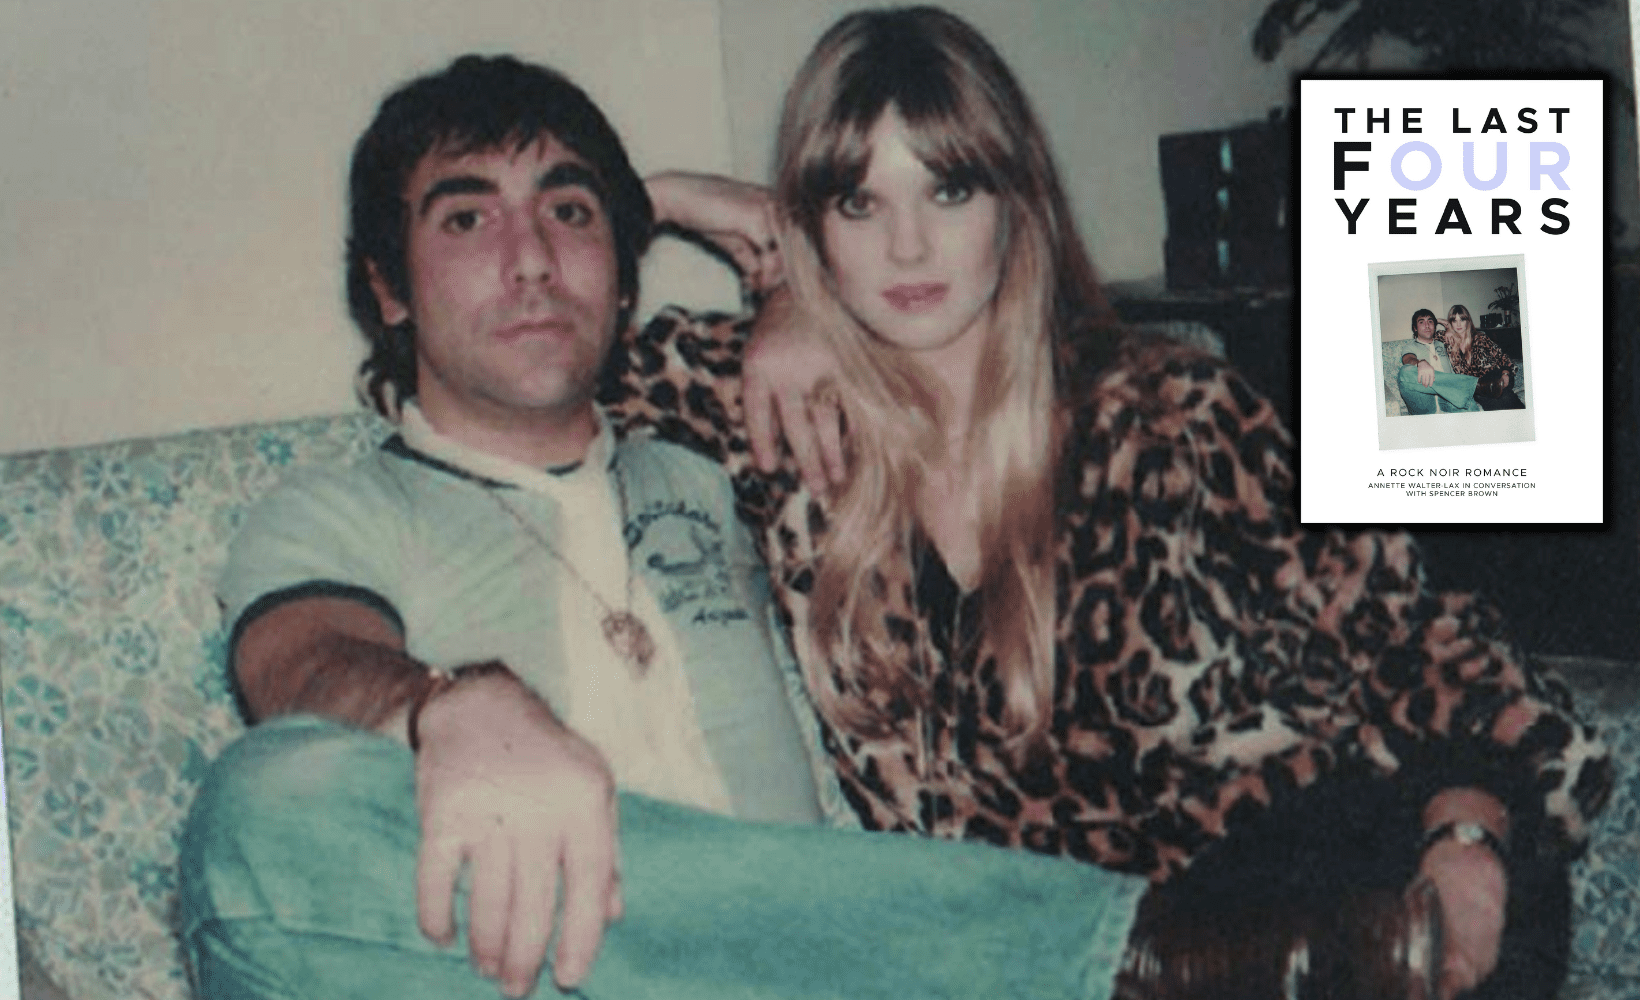 For four years, Annette Walter-Lax was Keith Moon's partner from their initial meeting in 1974, until Keith's tragic death on returning to the UK. Here is her account of their time together, told in a series of interviews. Annette's tale of her wild ride with one of rock's true originals will amaze fans of the genius drummer.